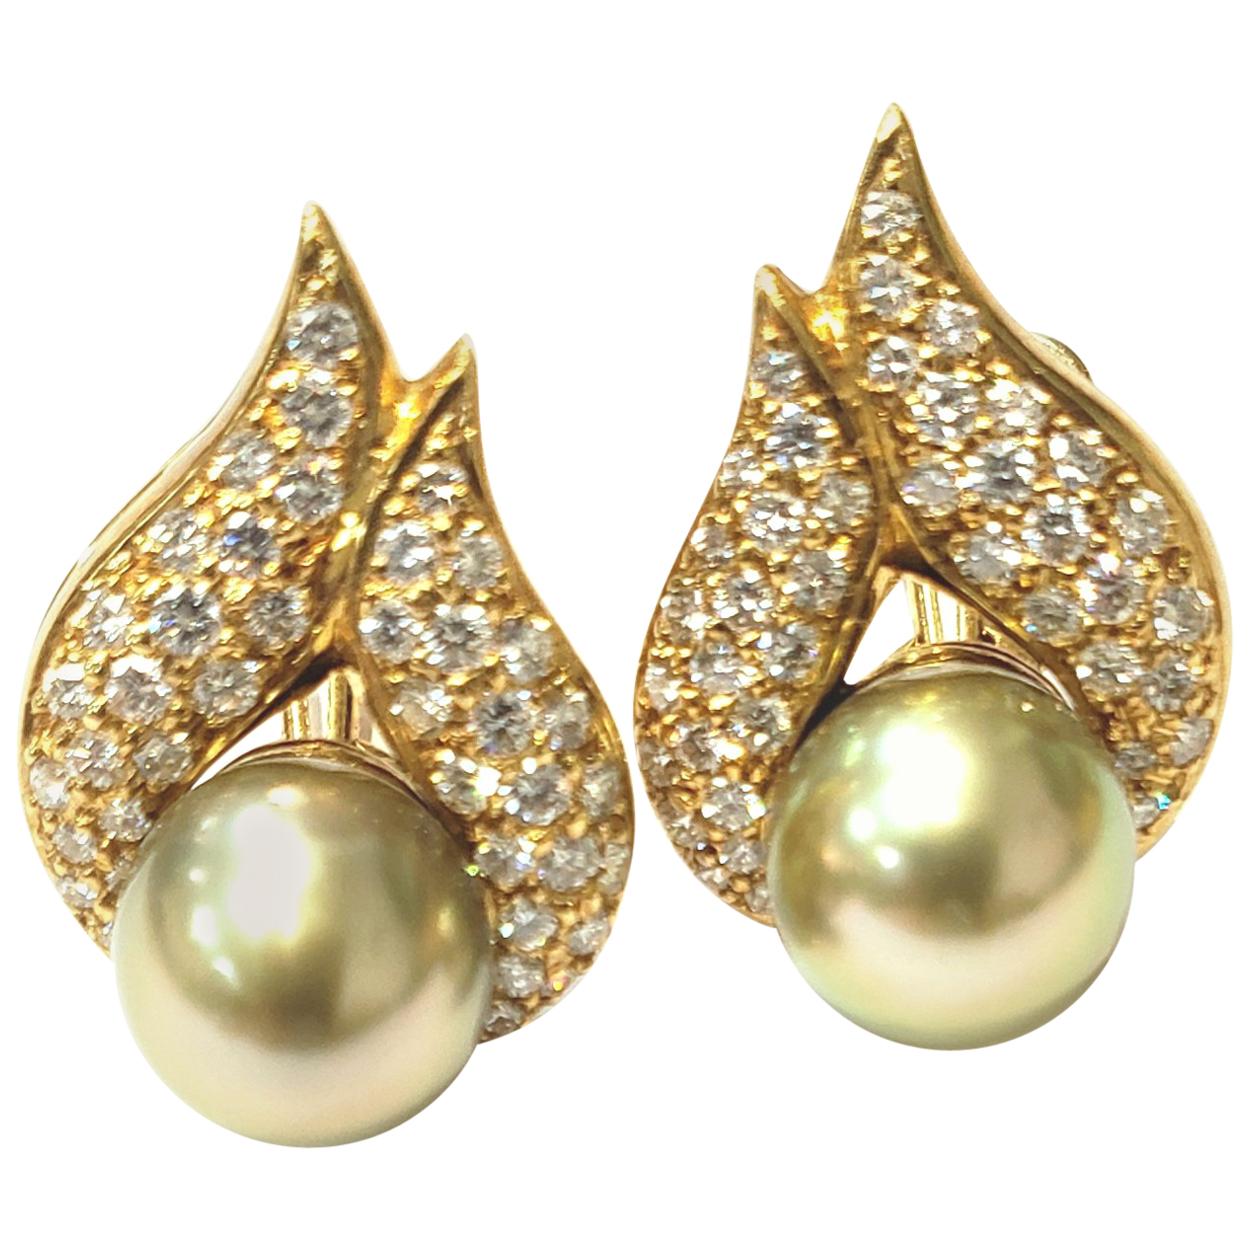 18 Karat Yellow Gold and Diamond Earrings with Pistachio Pearls by Gumuchian For Sale